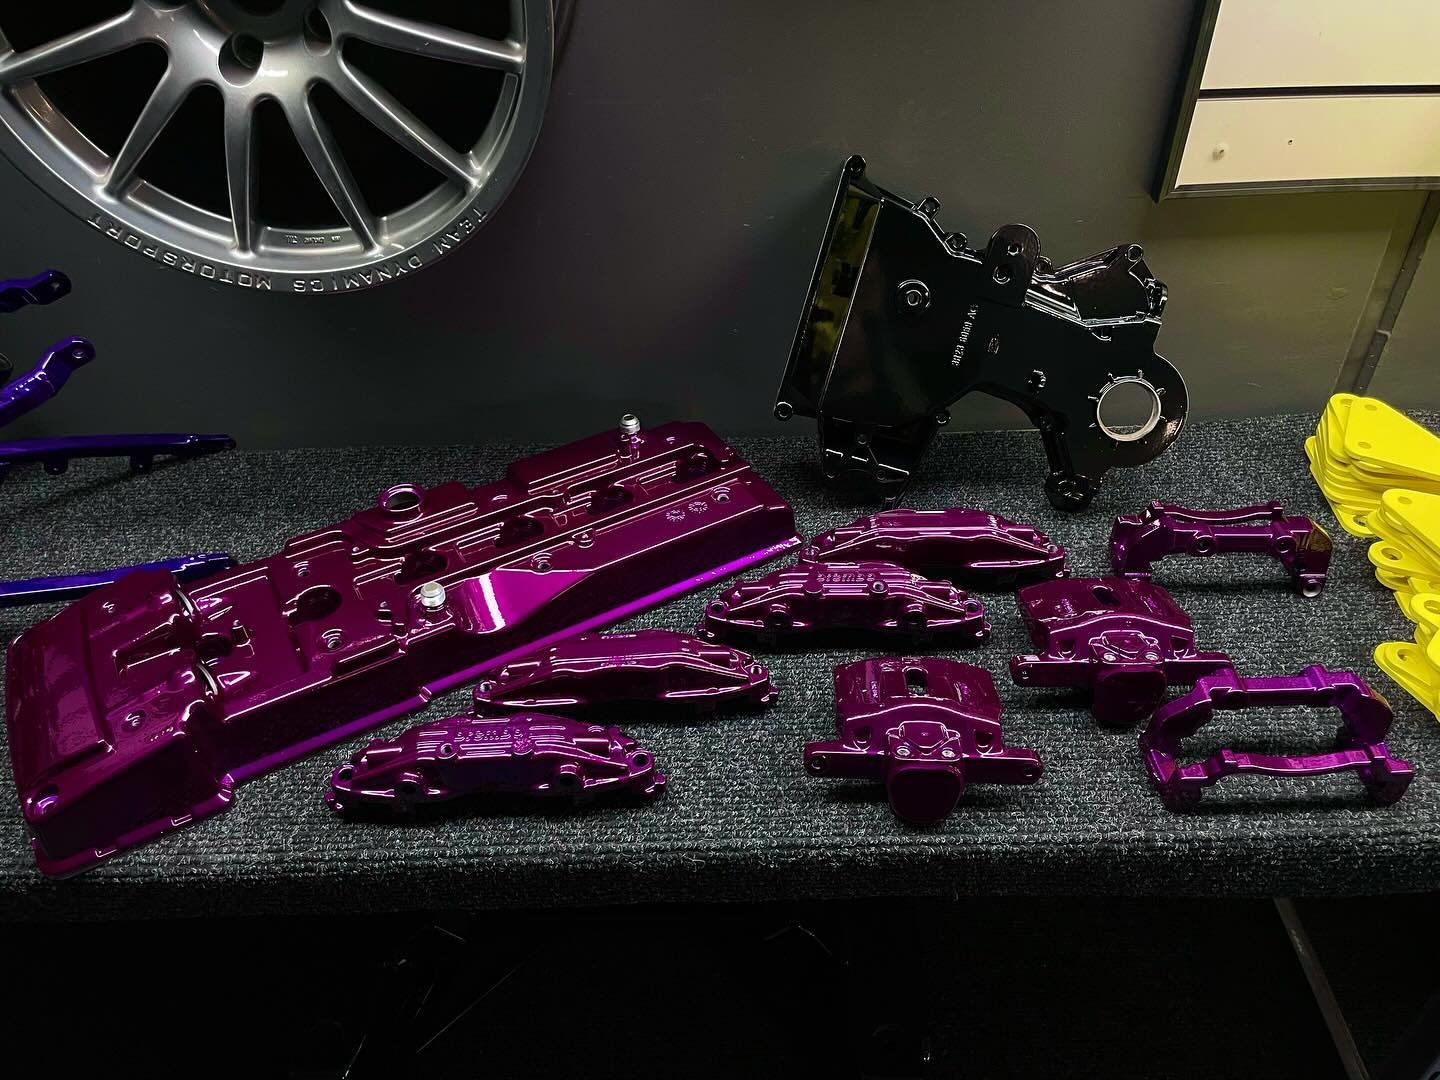 Illusion Violet rocker cover and callipers😎🔥
#epicpowdercoating #needpowdercoating #powdercoatingporn #powdercoatinglife #powdercoatingnation #powdercoatingwork #qualitypowdercoating #precisionpowdercoating #showoffpowdercoating #extremepowdercoati